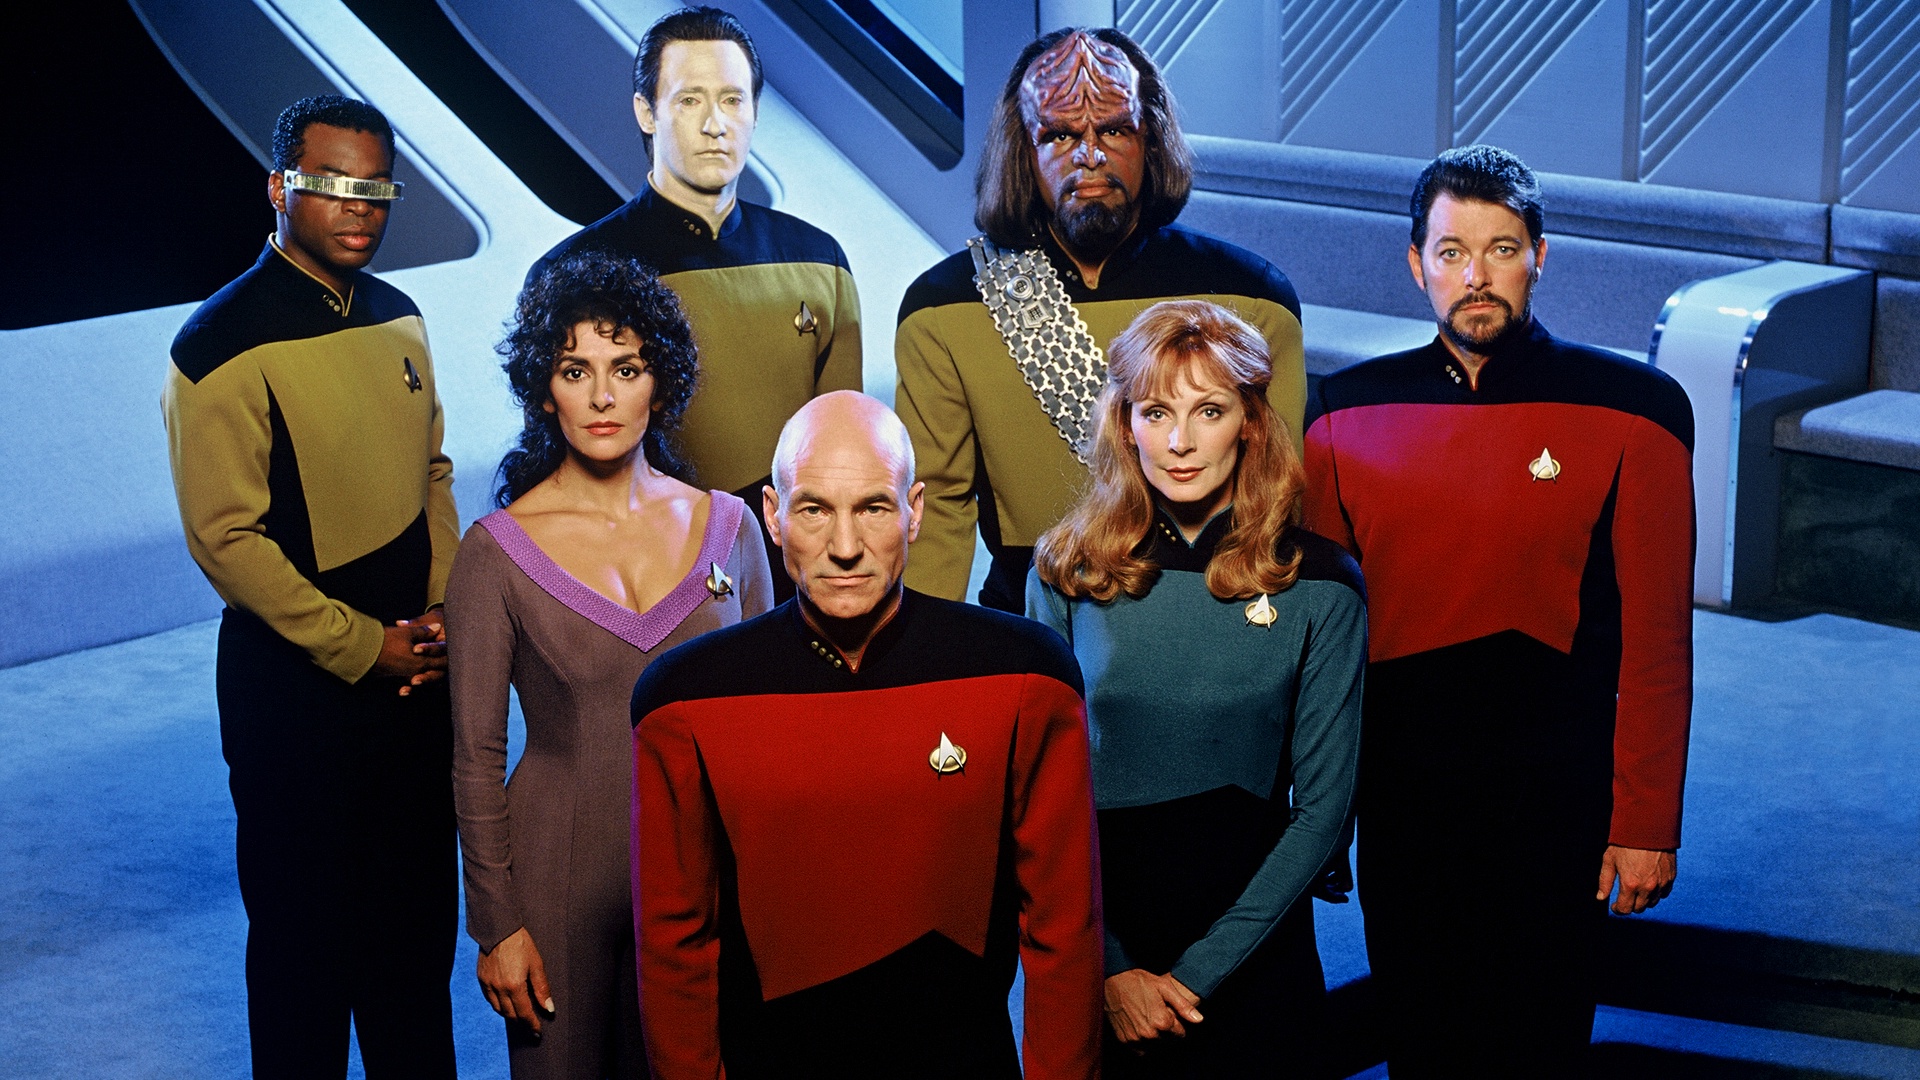 Video Game Star Trek: The Next Generation - Future's Past HD Wallpaper | Background Image